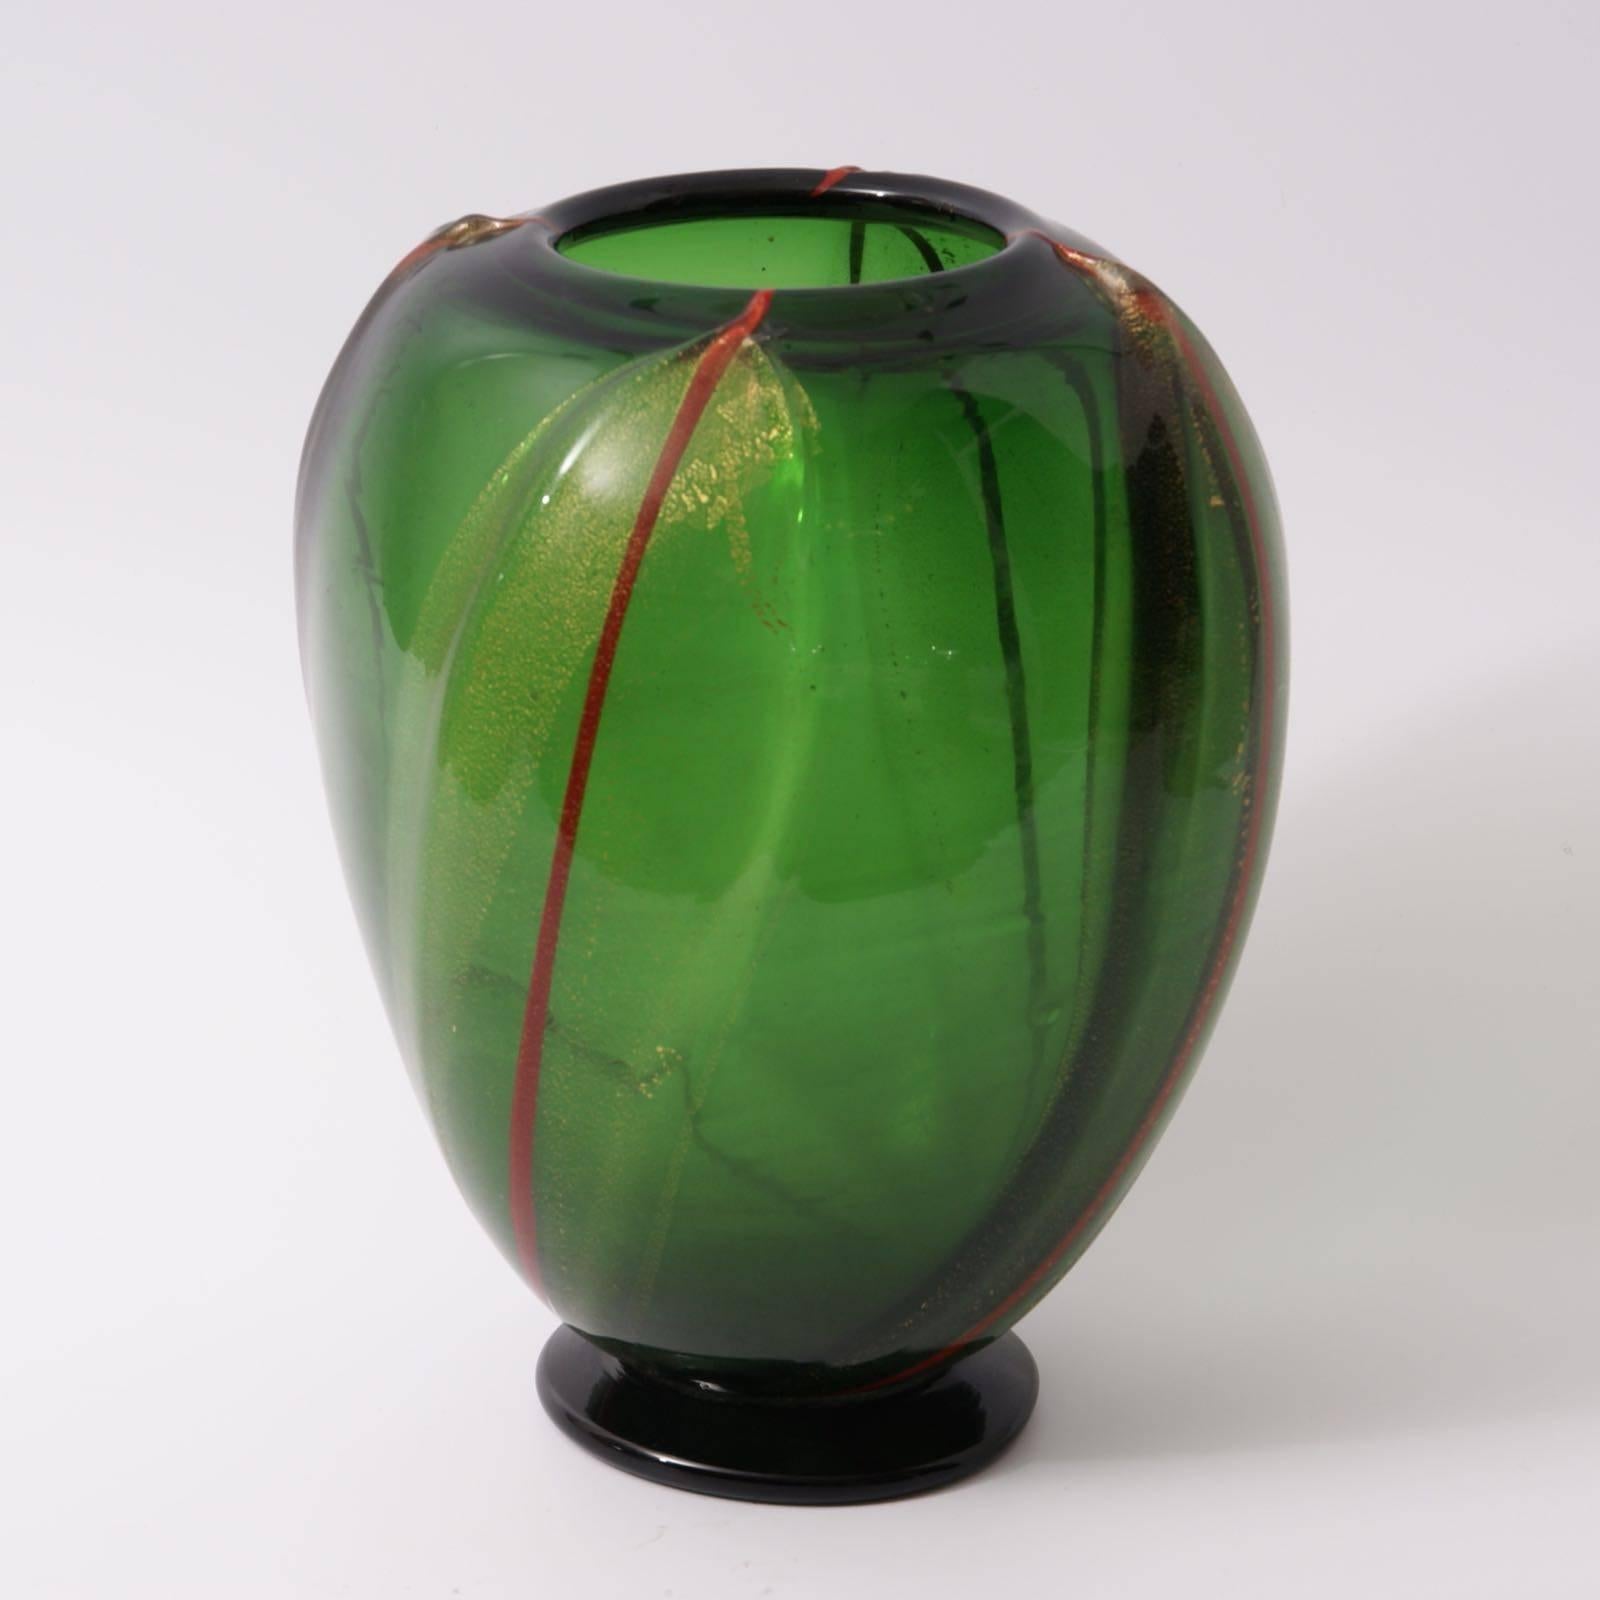 The green glass with gold inclusions and four red stripes footed vase, designed by Vittorio Donà for S.A.I.A.R. Ferro-Toso, circa 1933.